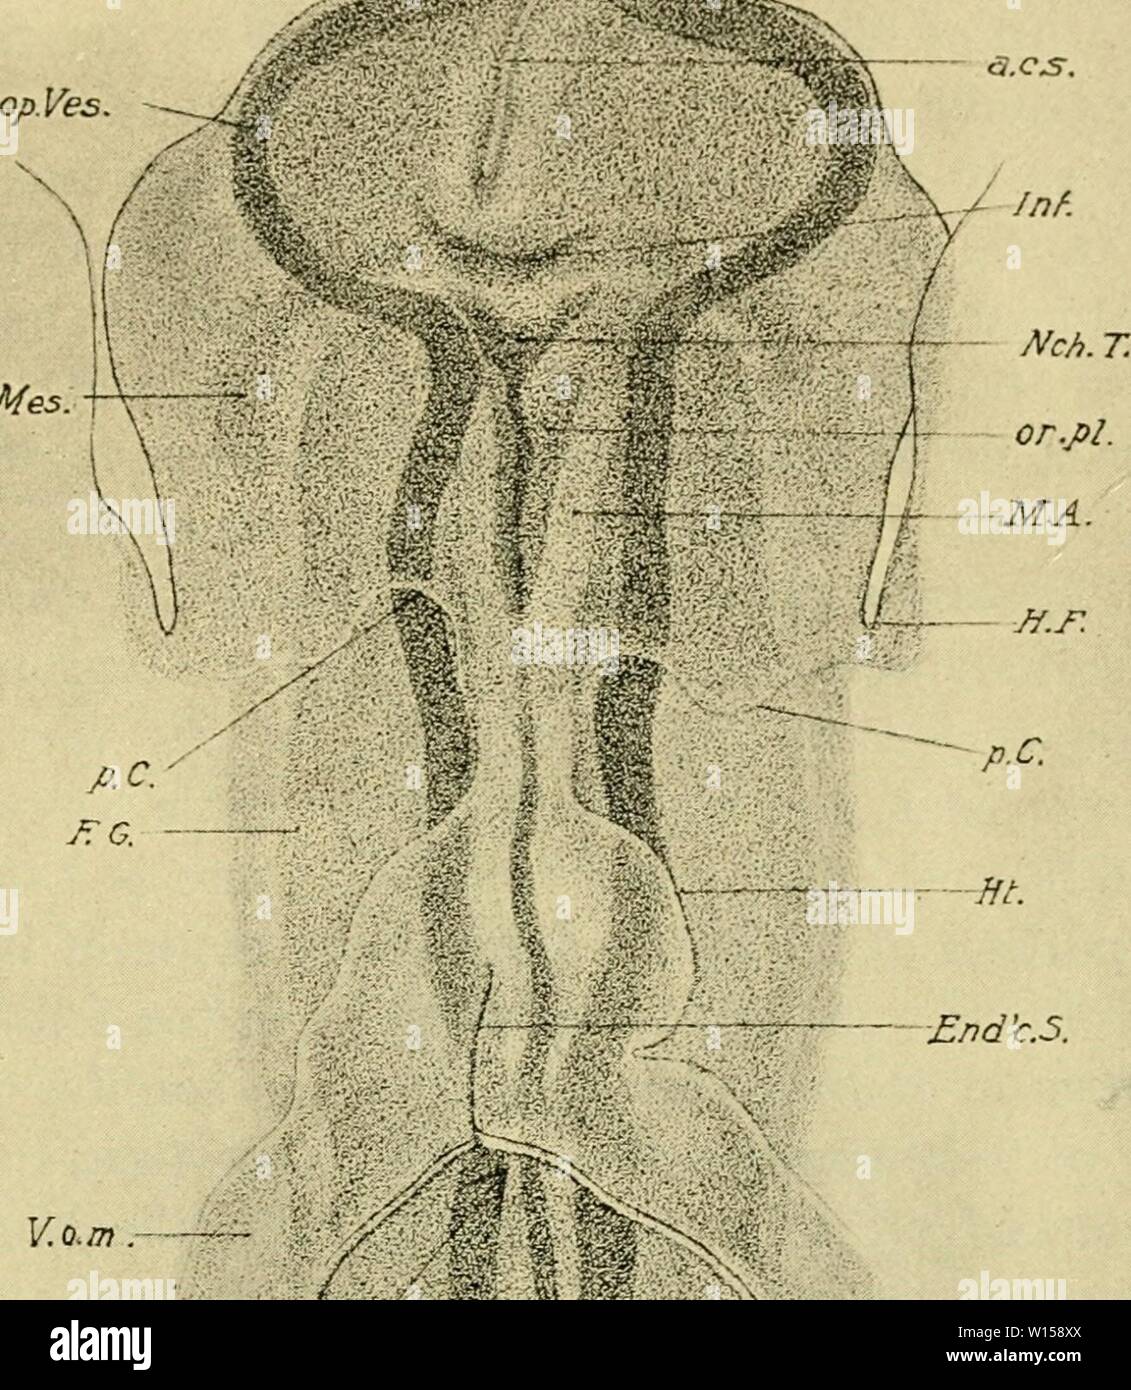 Archive image from page 126 of The development of the chick. The development of the chick : an introduction to embryology . developmentofchi02lill Year: 1936  HEAD-FOLD TO TWELVE SOMITES 107 ceph. Mes    Â£nd'c.5. V.o.m. Kifi. d.i.p. â B -S.B. Fig. 62. â The head of the same embryo from beneath more highly magnified. In this drawing an attempt is made to show different levels of the embryo superposed: thus the heart is uppermost in the figure, beneath this the fore-gut (F. G.), beneath this the notbchord, and at the lowest level, the neural tube. a. c. s., Anterior cerebral suture. Inf., Infun Stock Photo